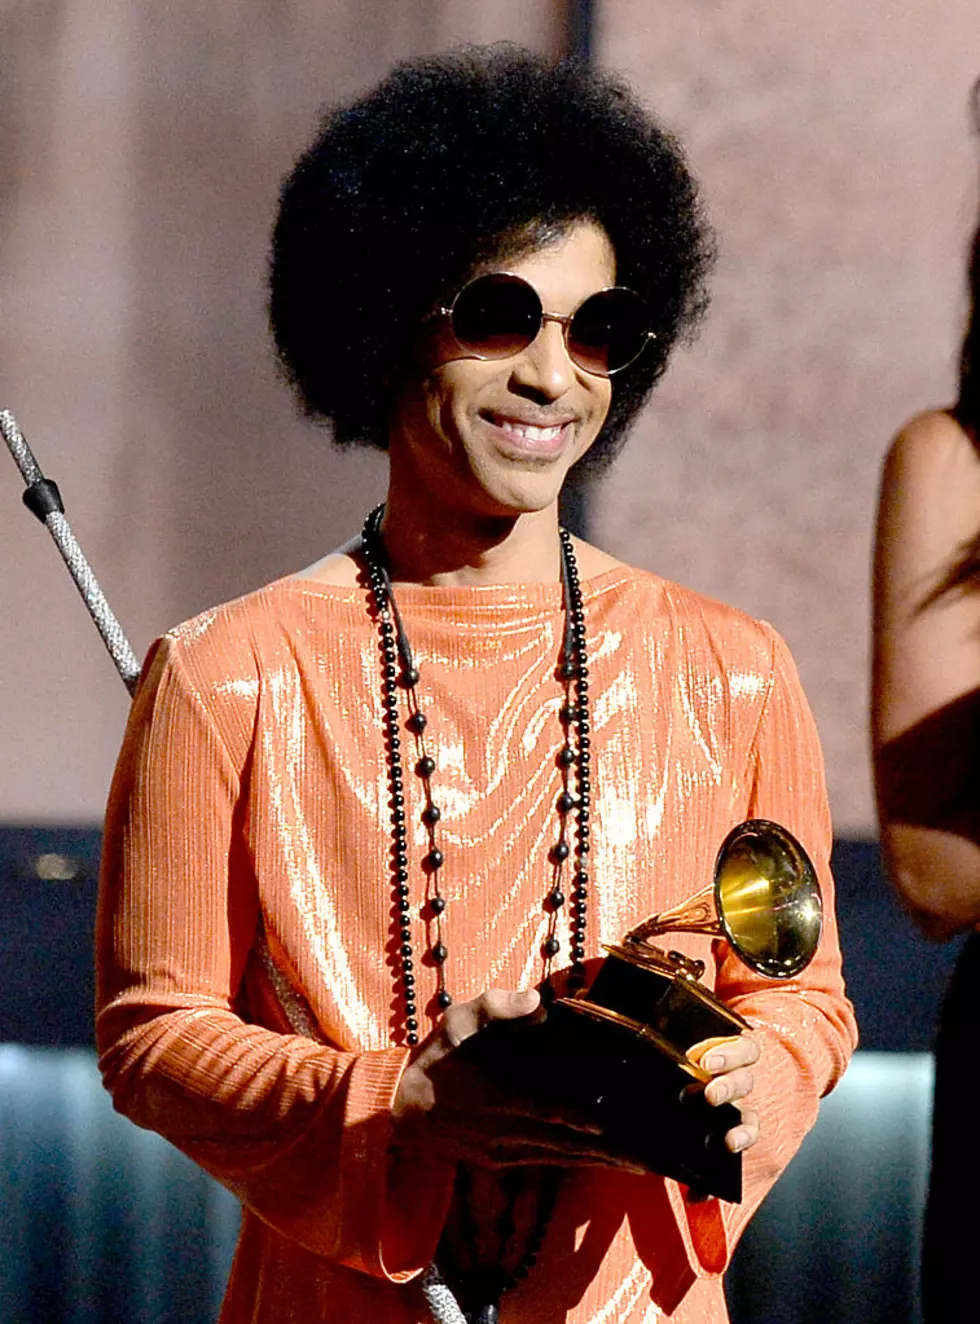 Prince Had Been Dealing with Ailments Before Death